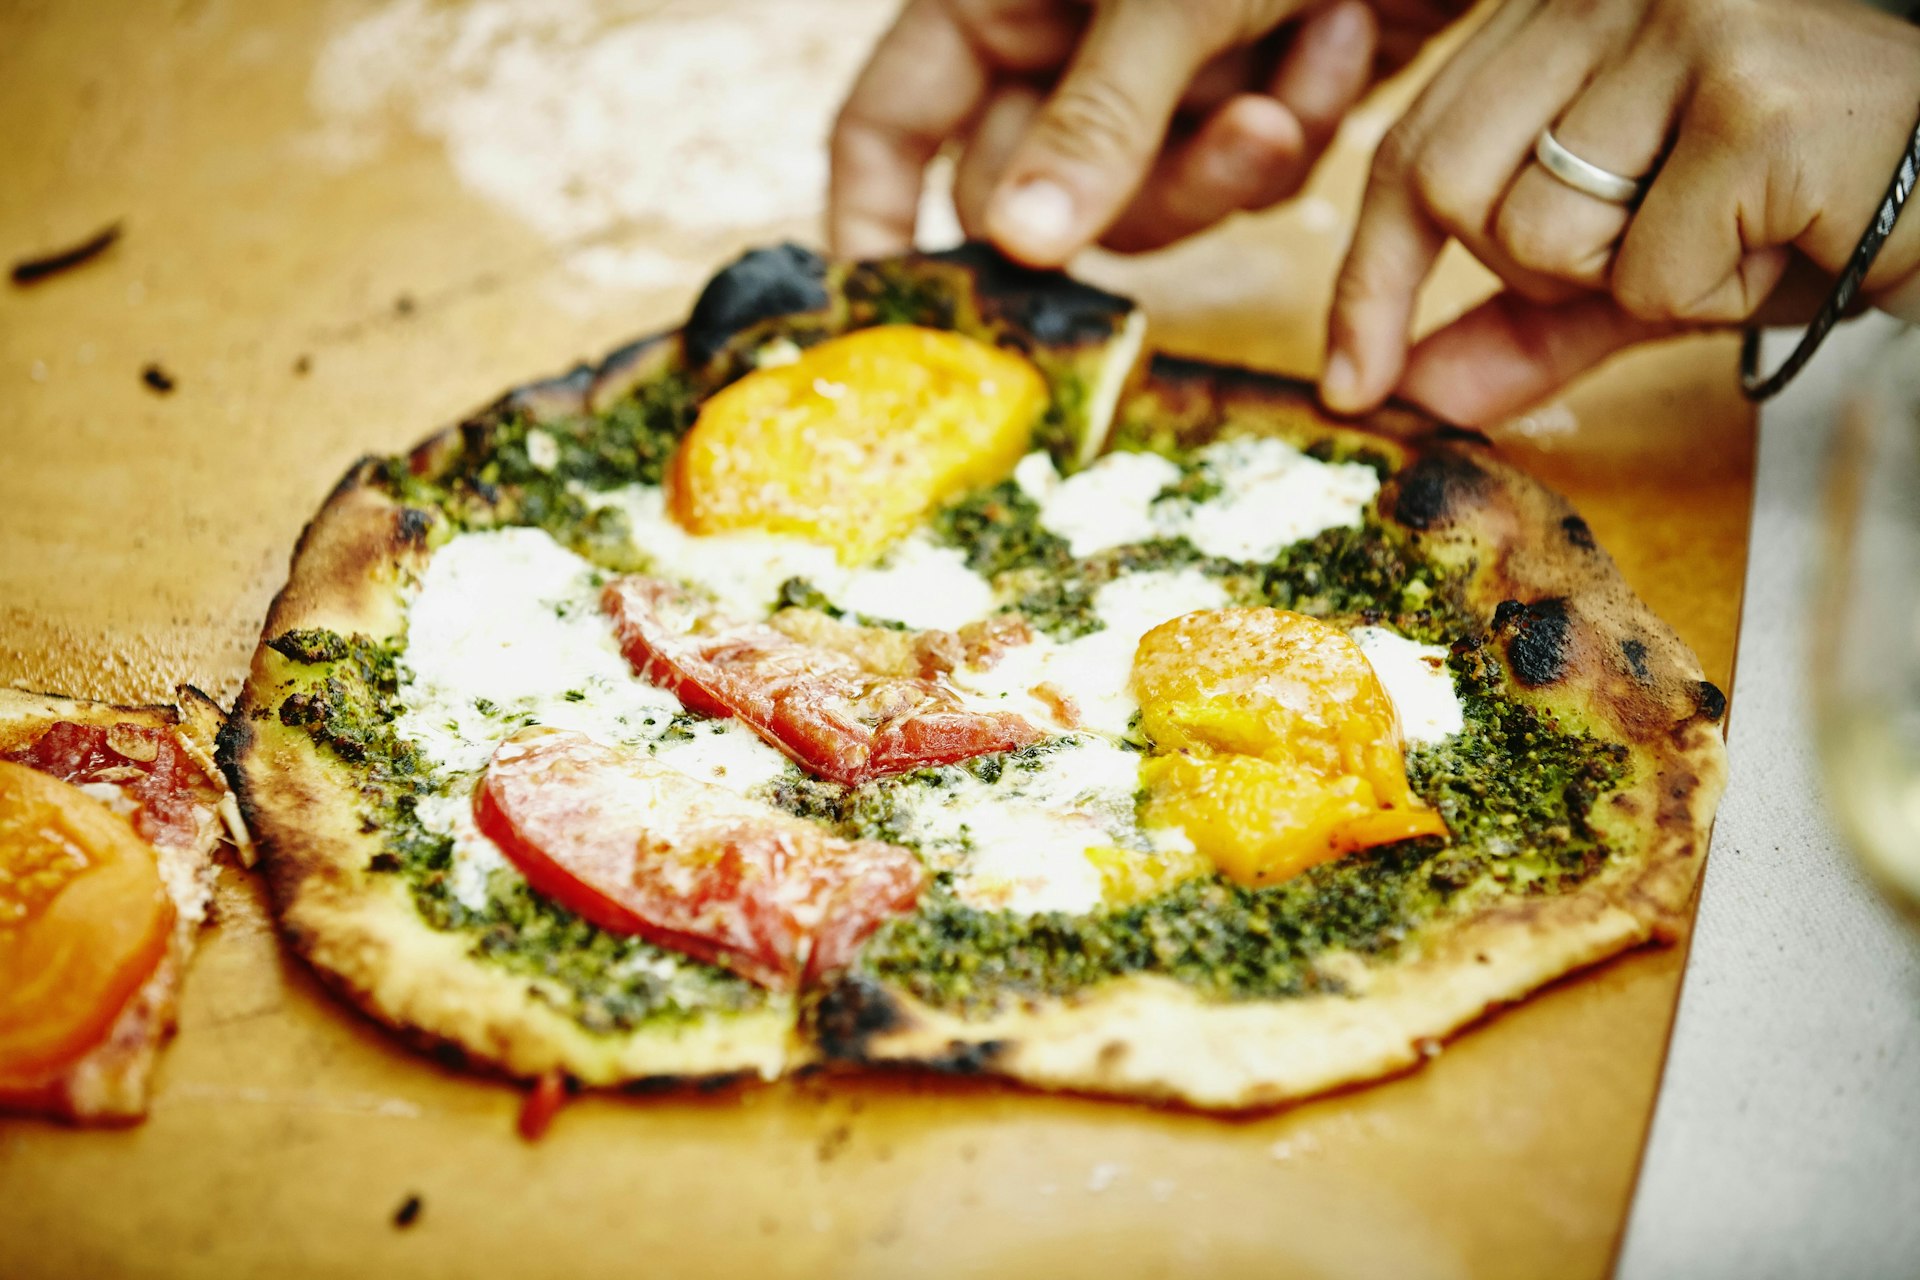 Woodfired pizza in Seattle.  Image by Thomas Barwick / Digital Vision / Getty